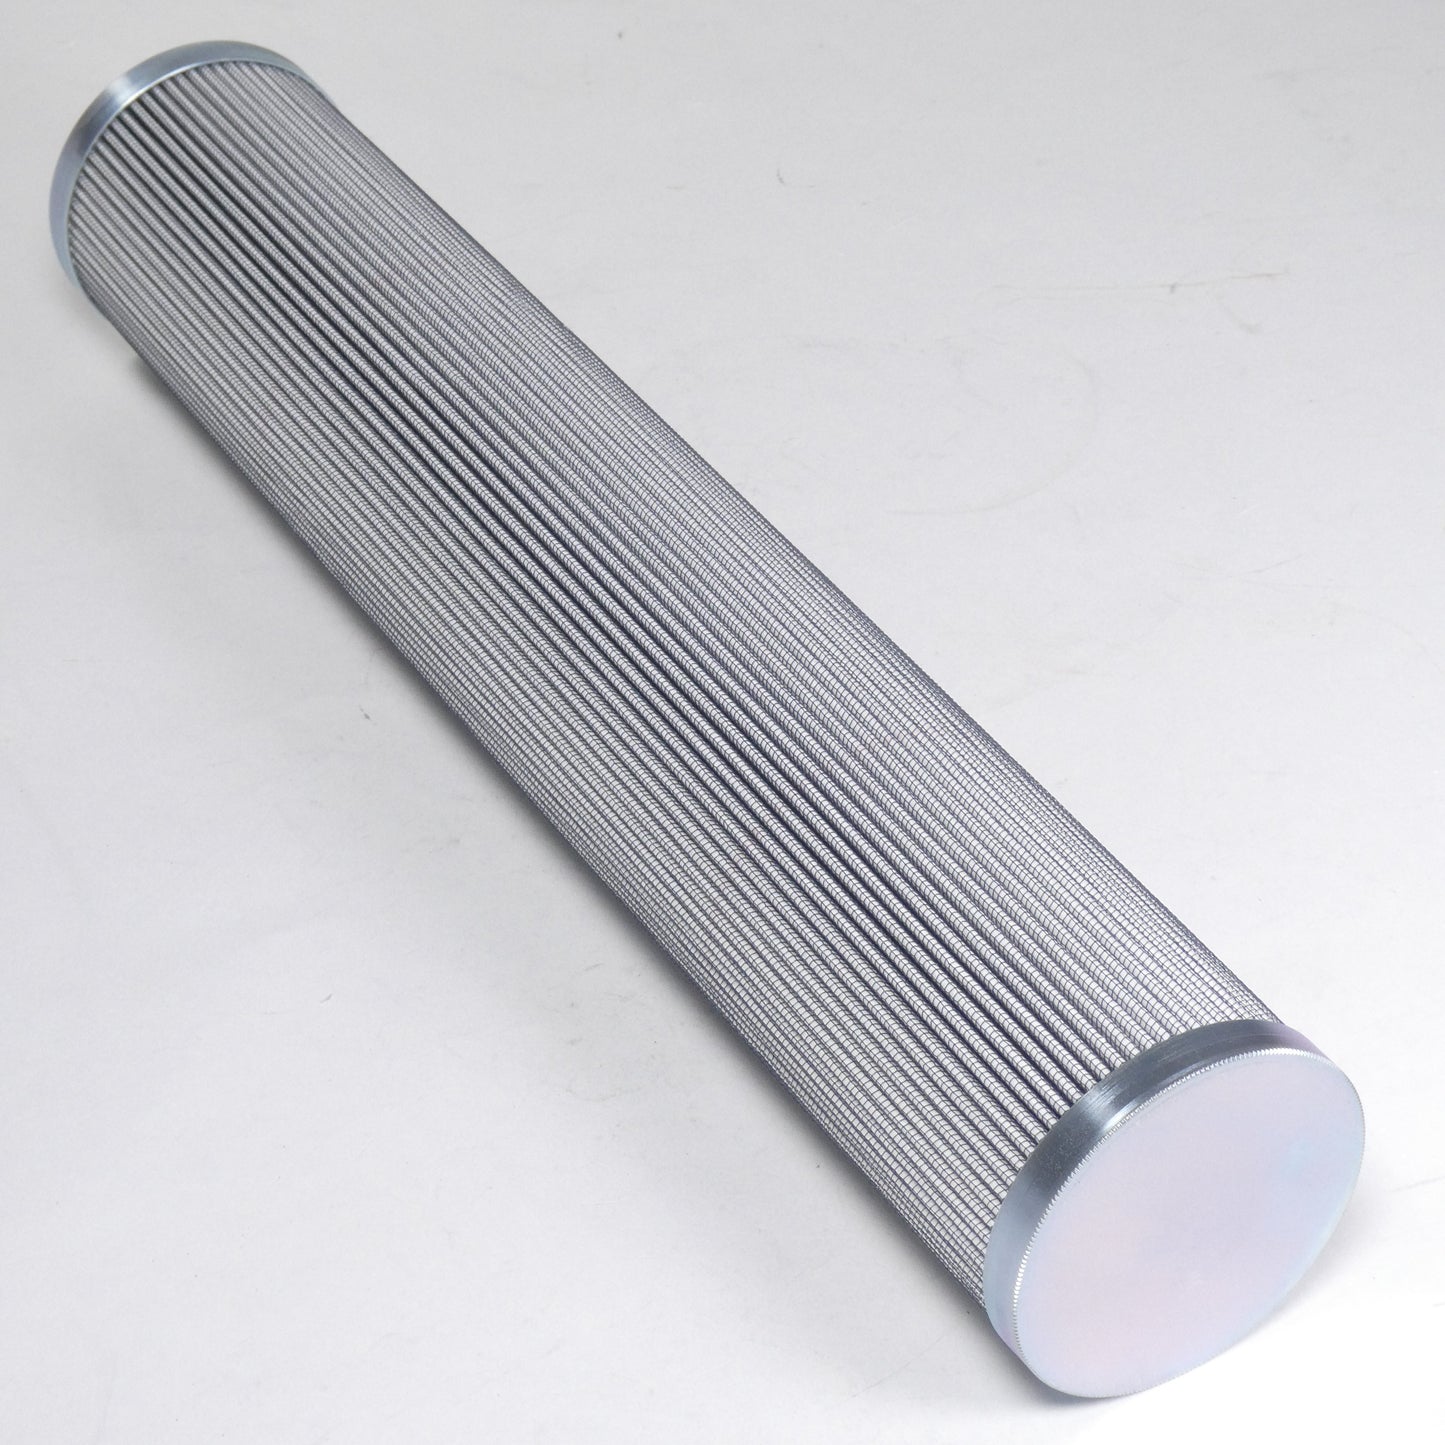 Hydrafil Replacement Filter Element for Filtersoft H9616MAABH